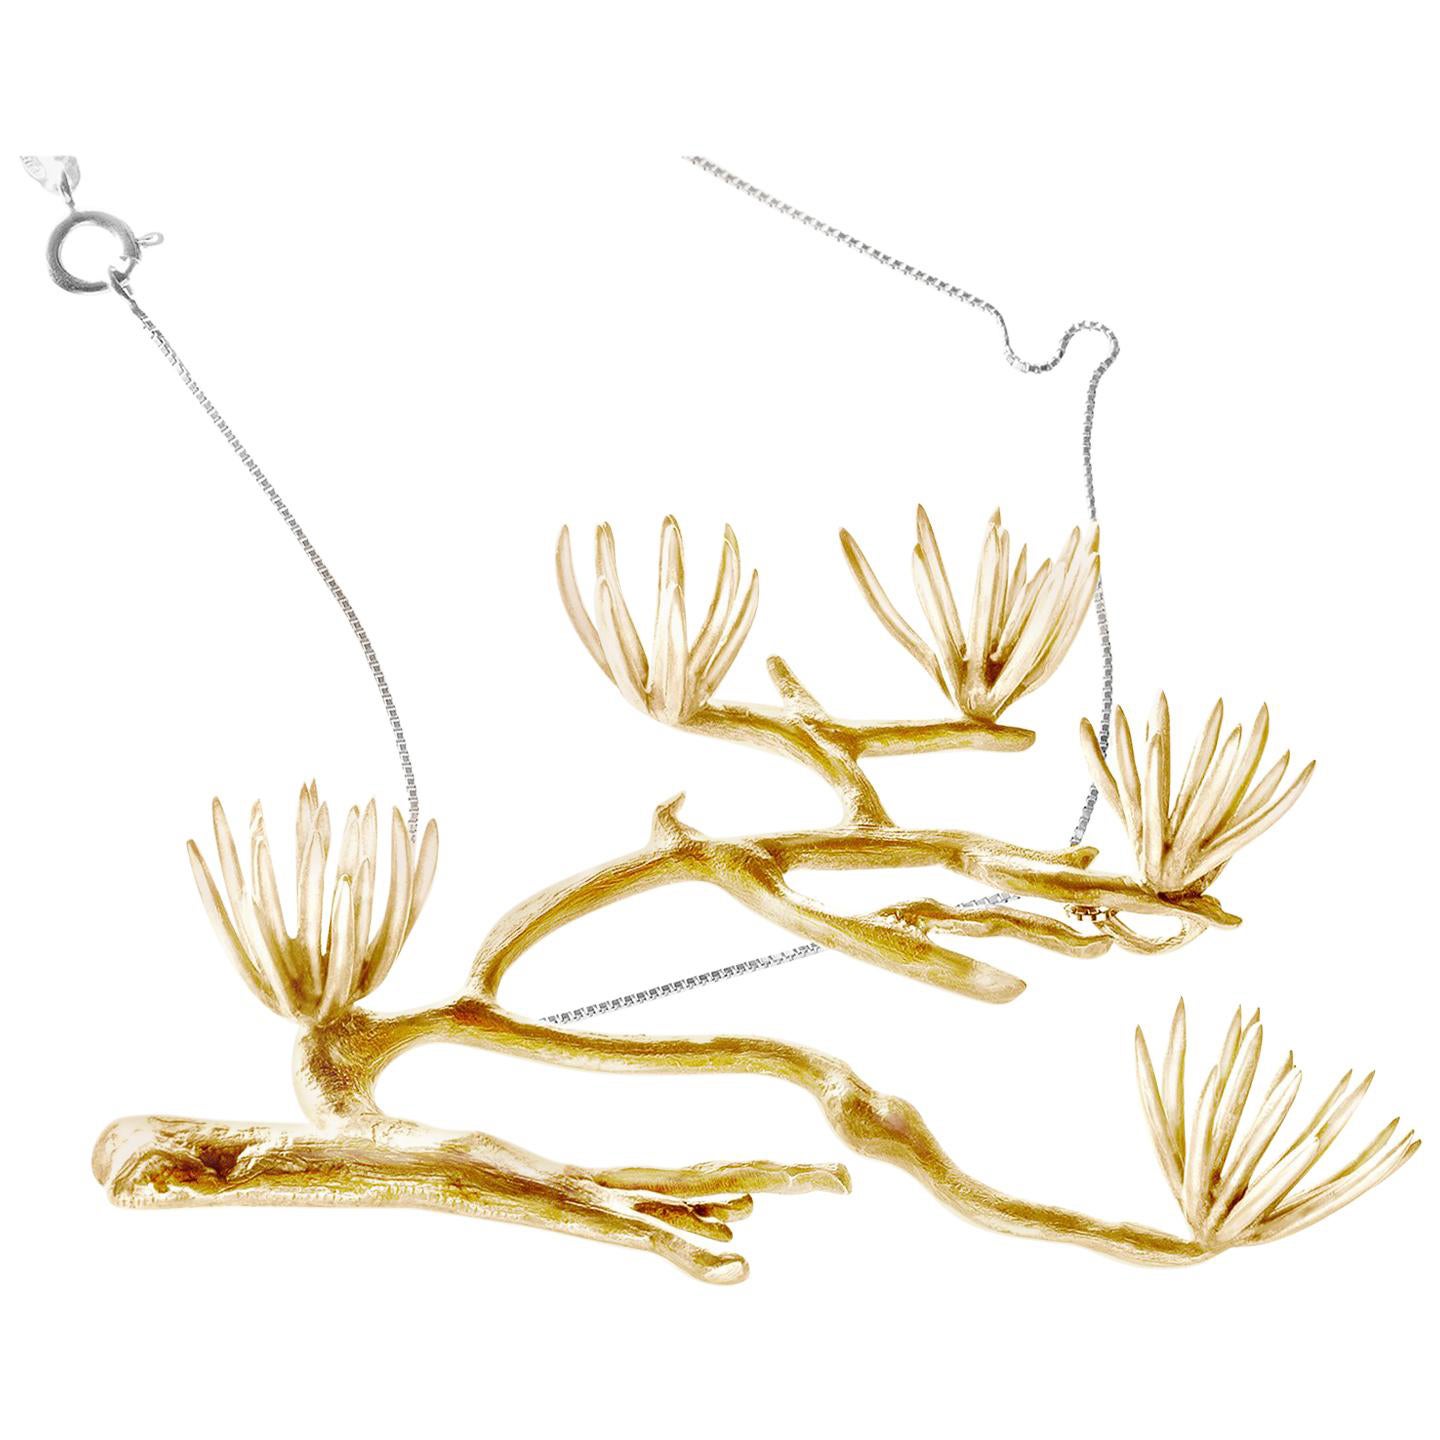 Featured in Vogue Yellow Gold Necklace Pine by the Artist For Sale